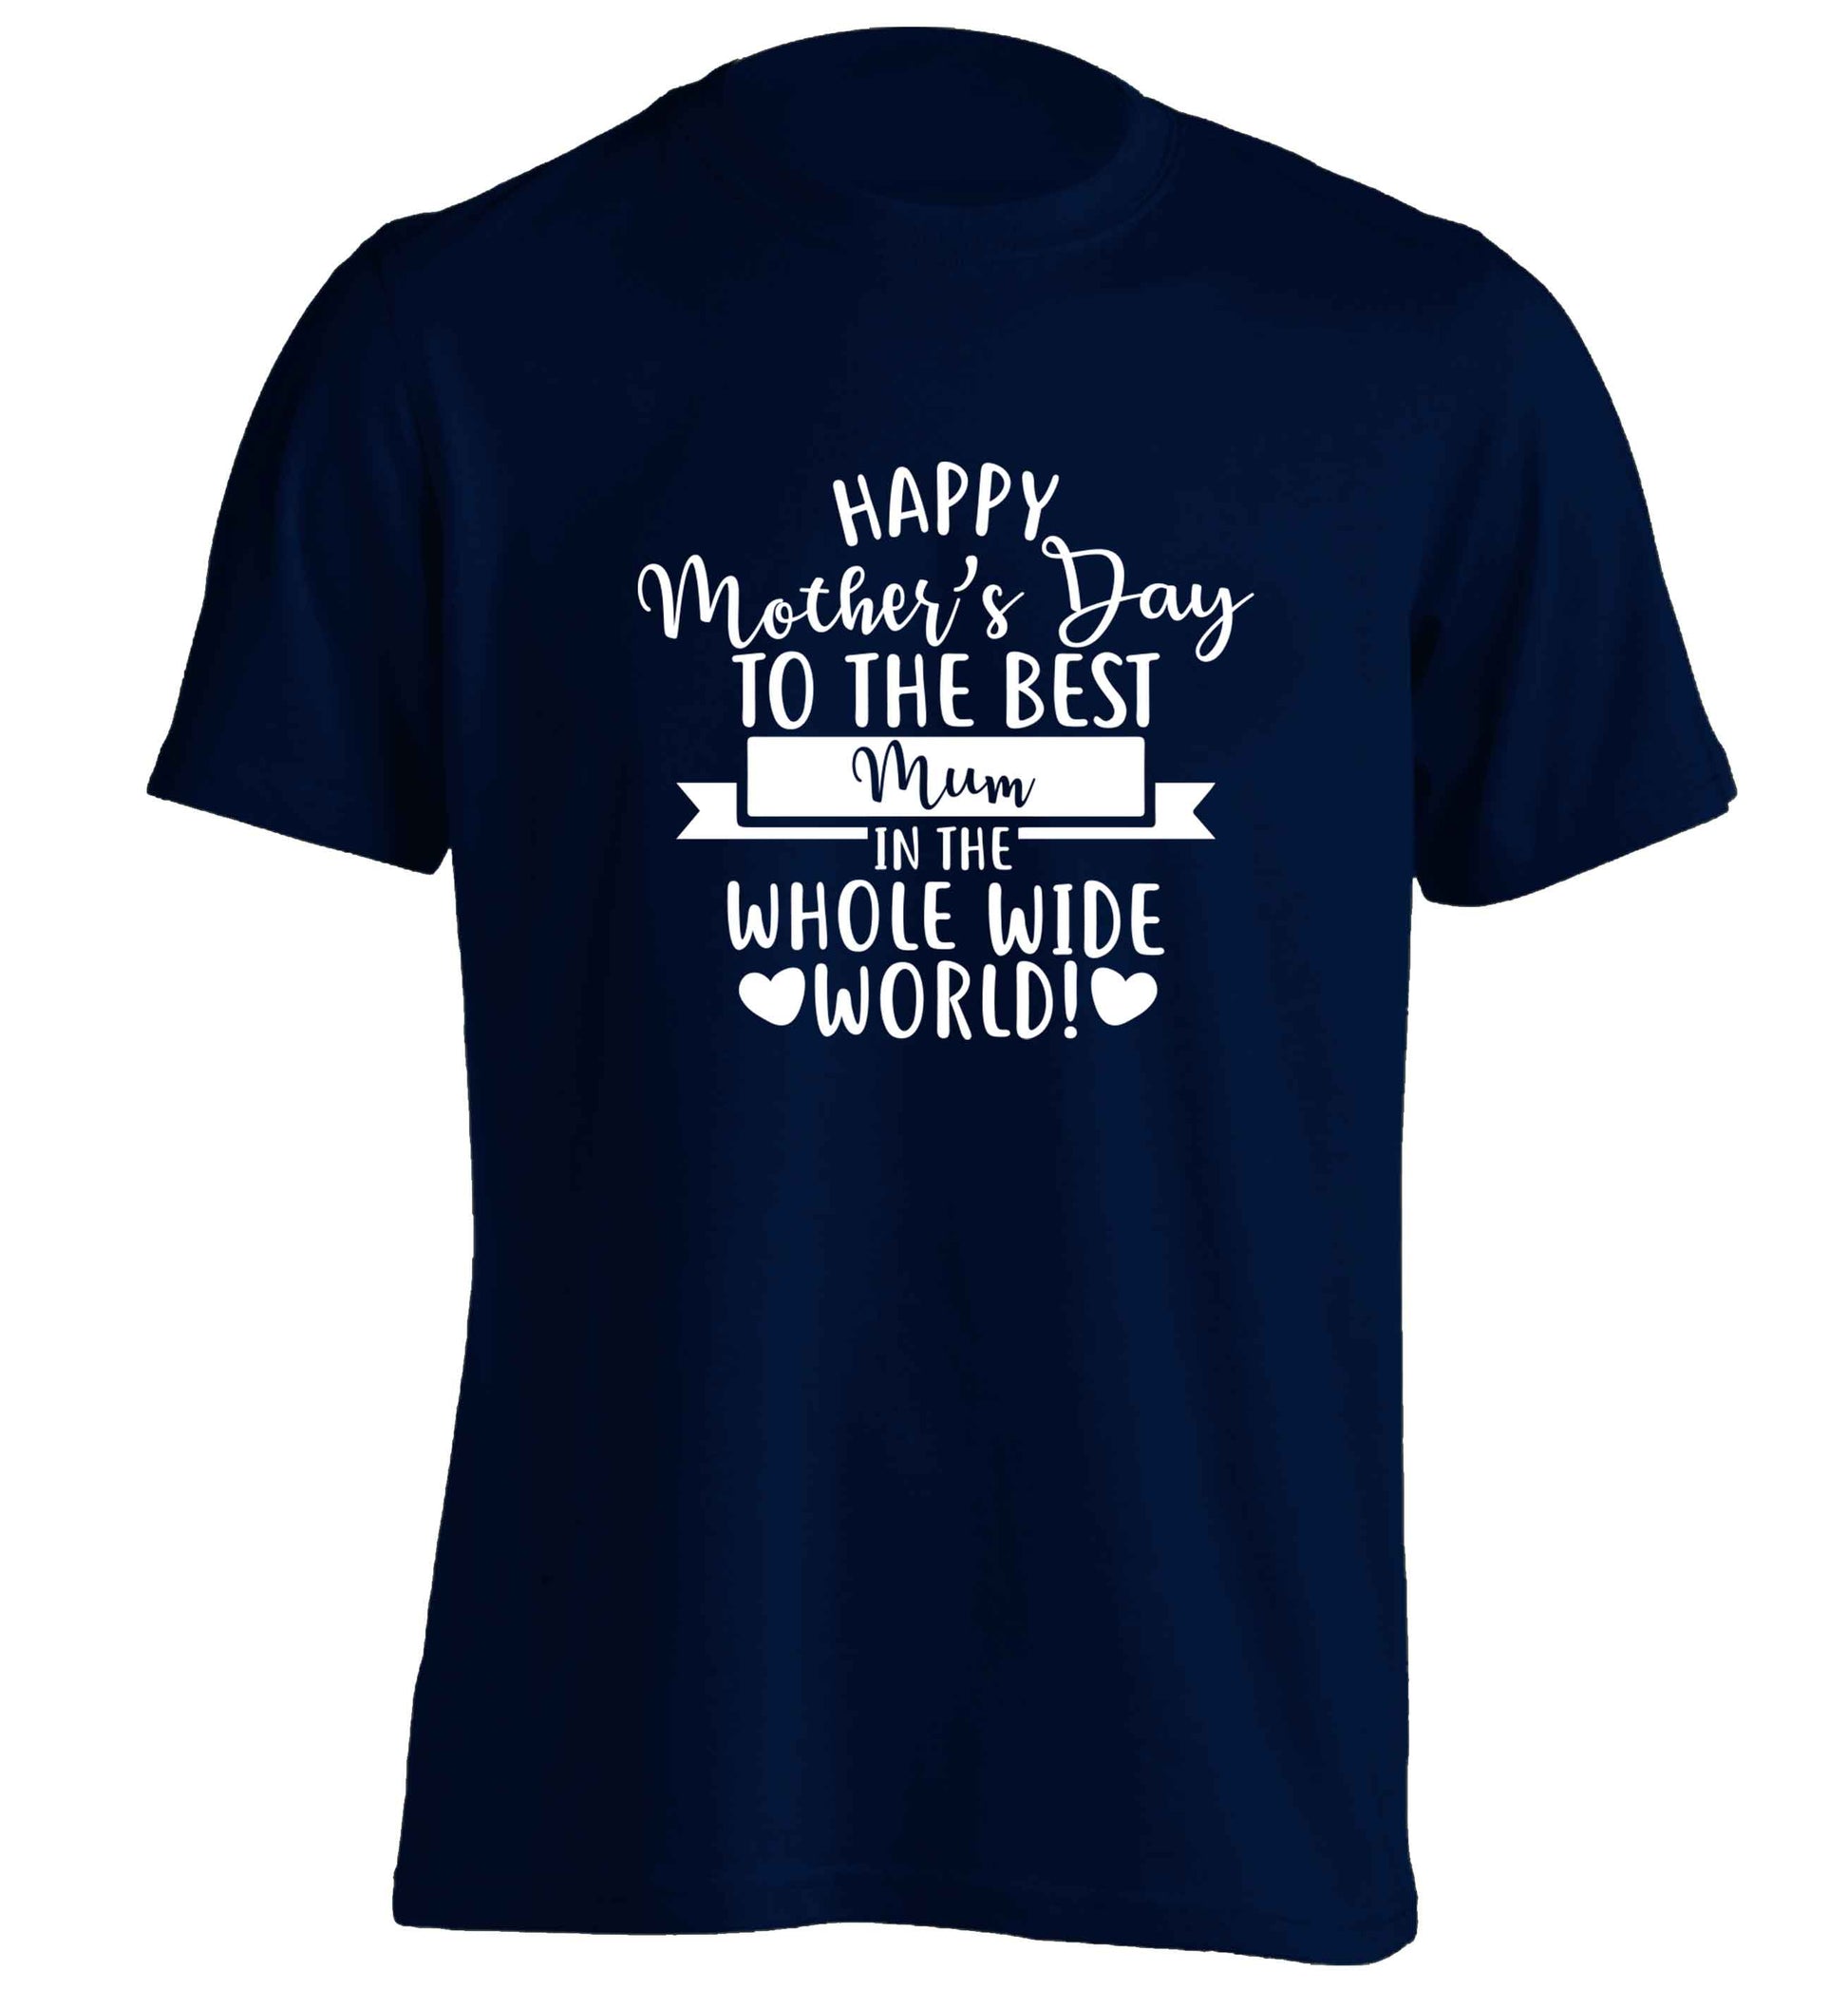 Happy mother's day to the best mum in the world adults unisex navy Tshirt 2XL